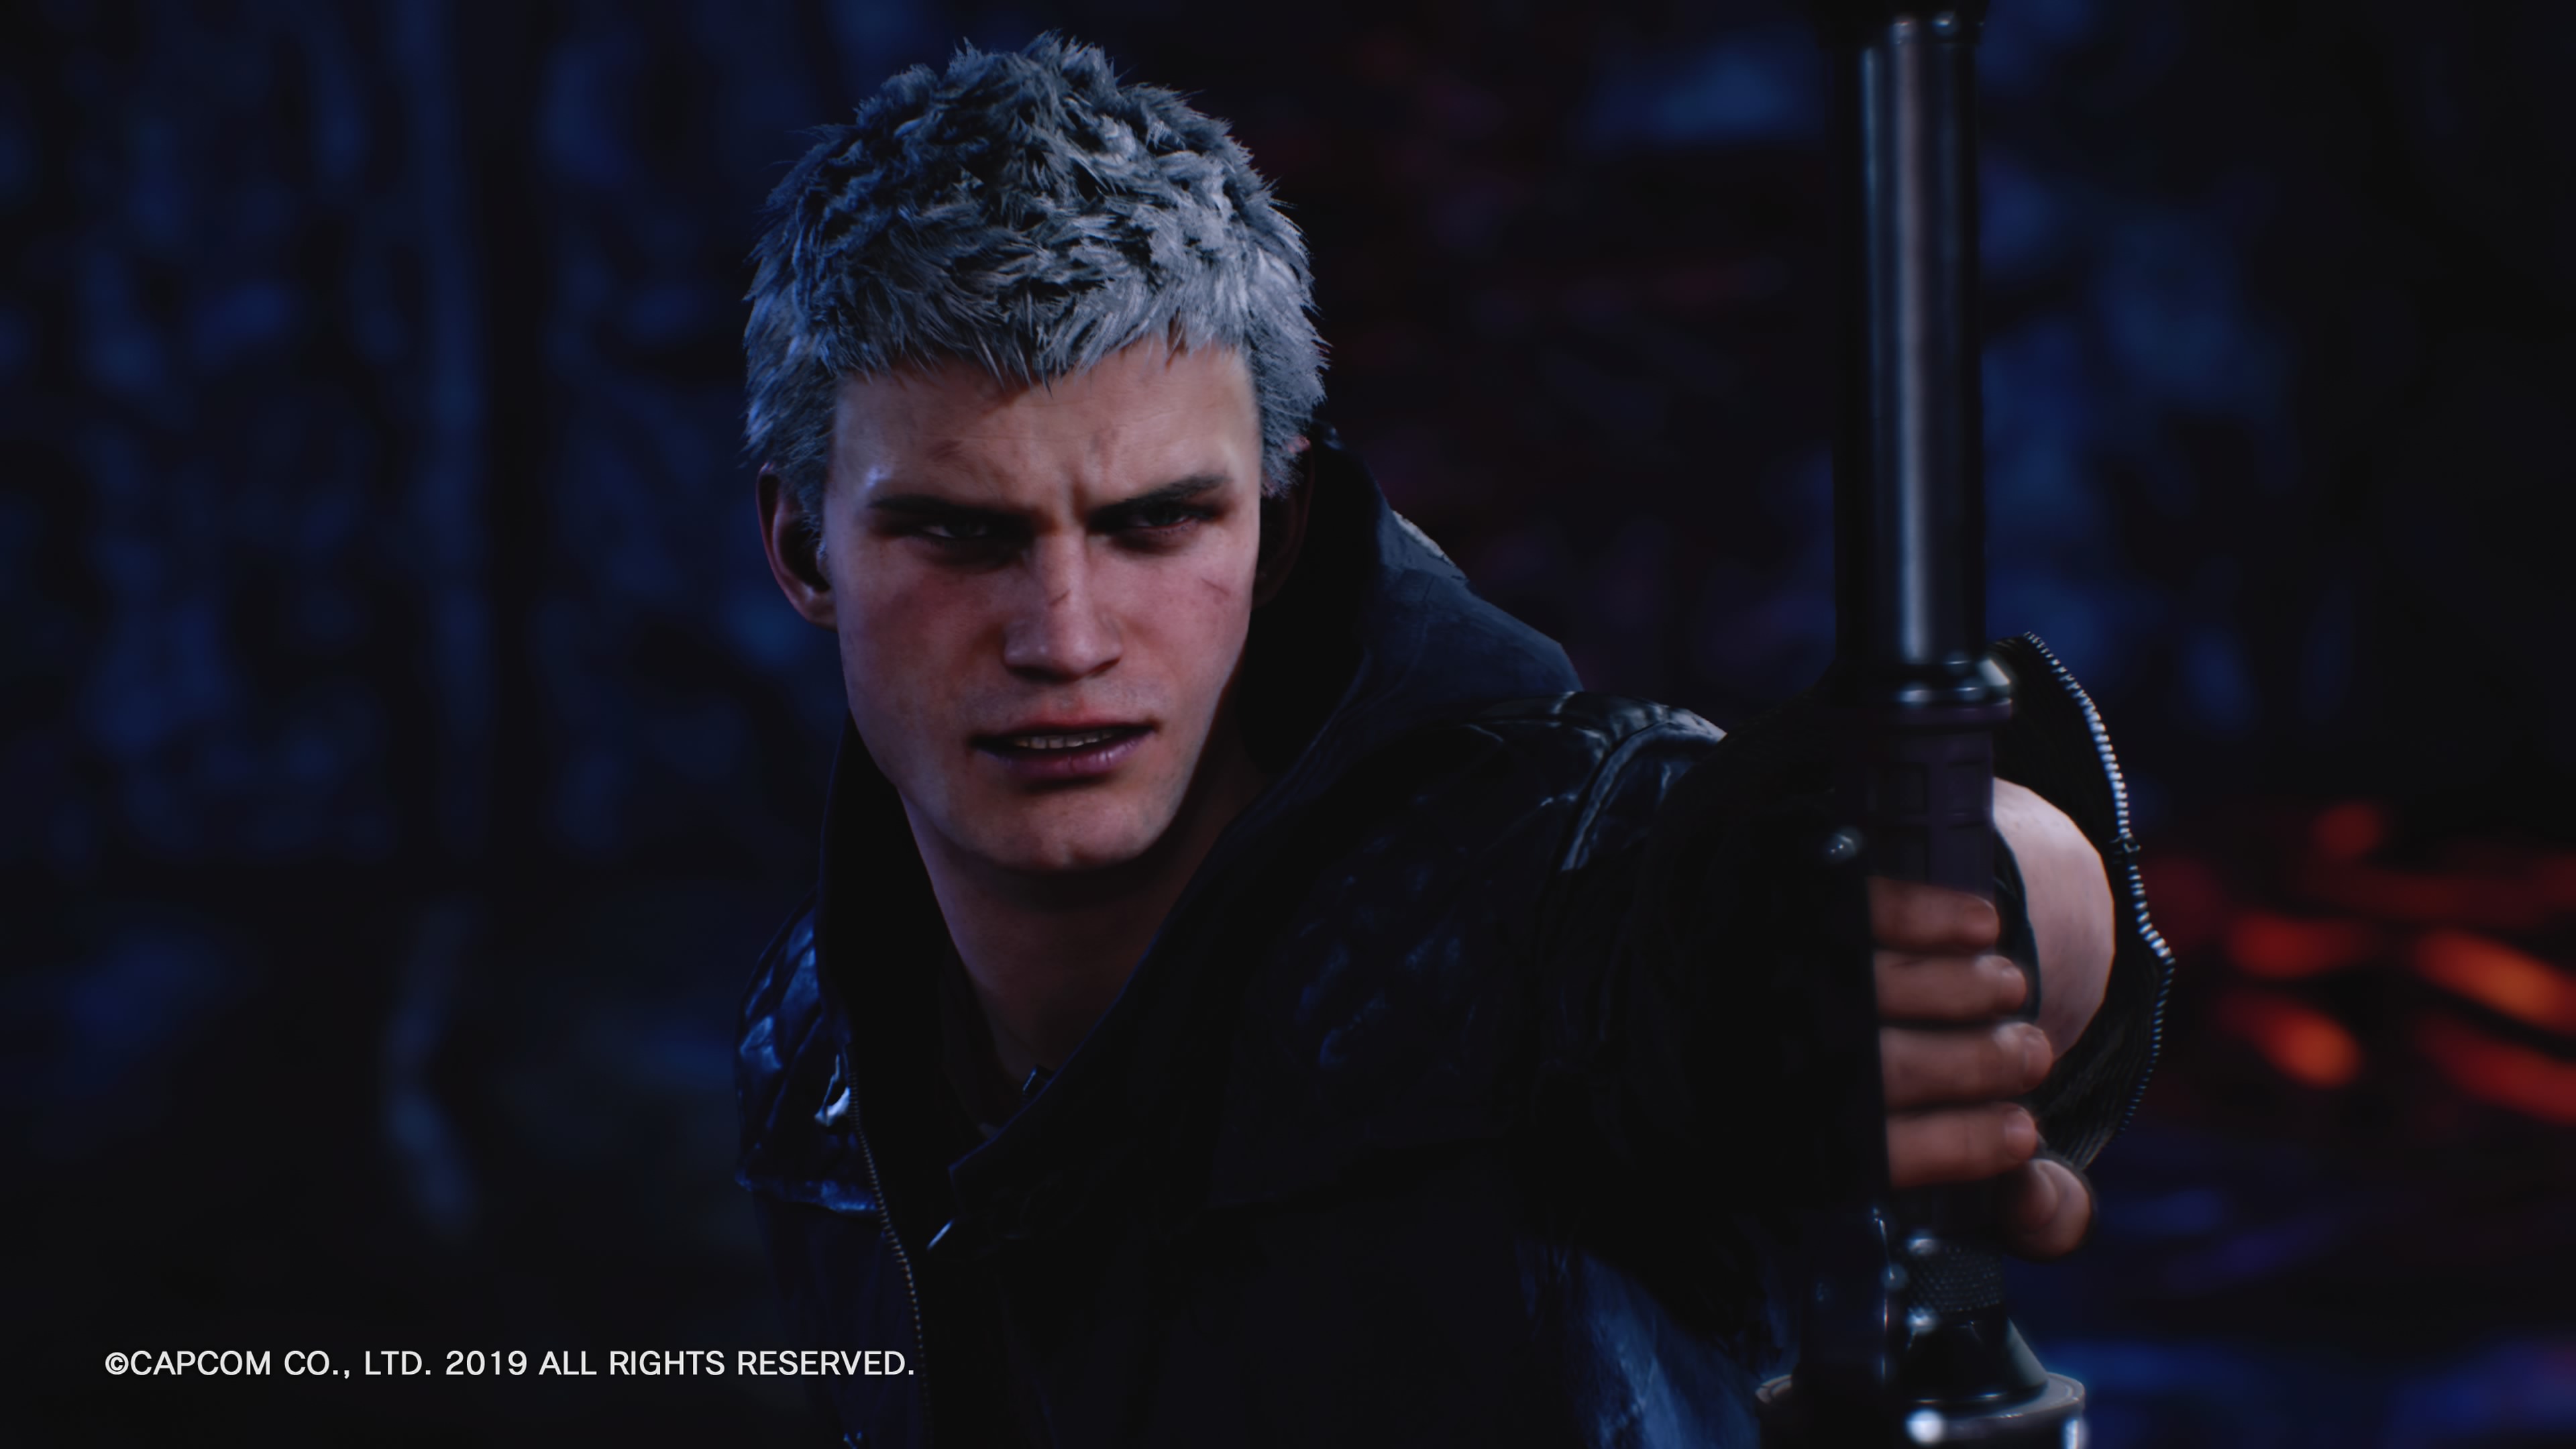 Devil May Cry 5 Review